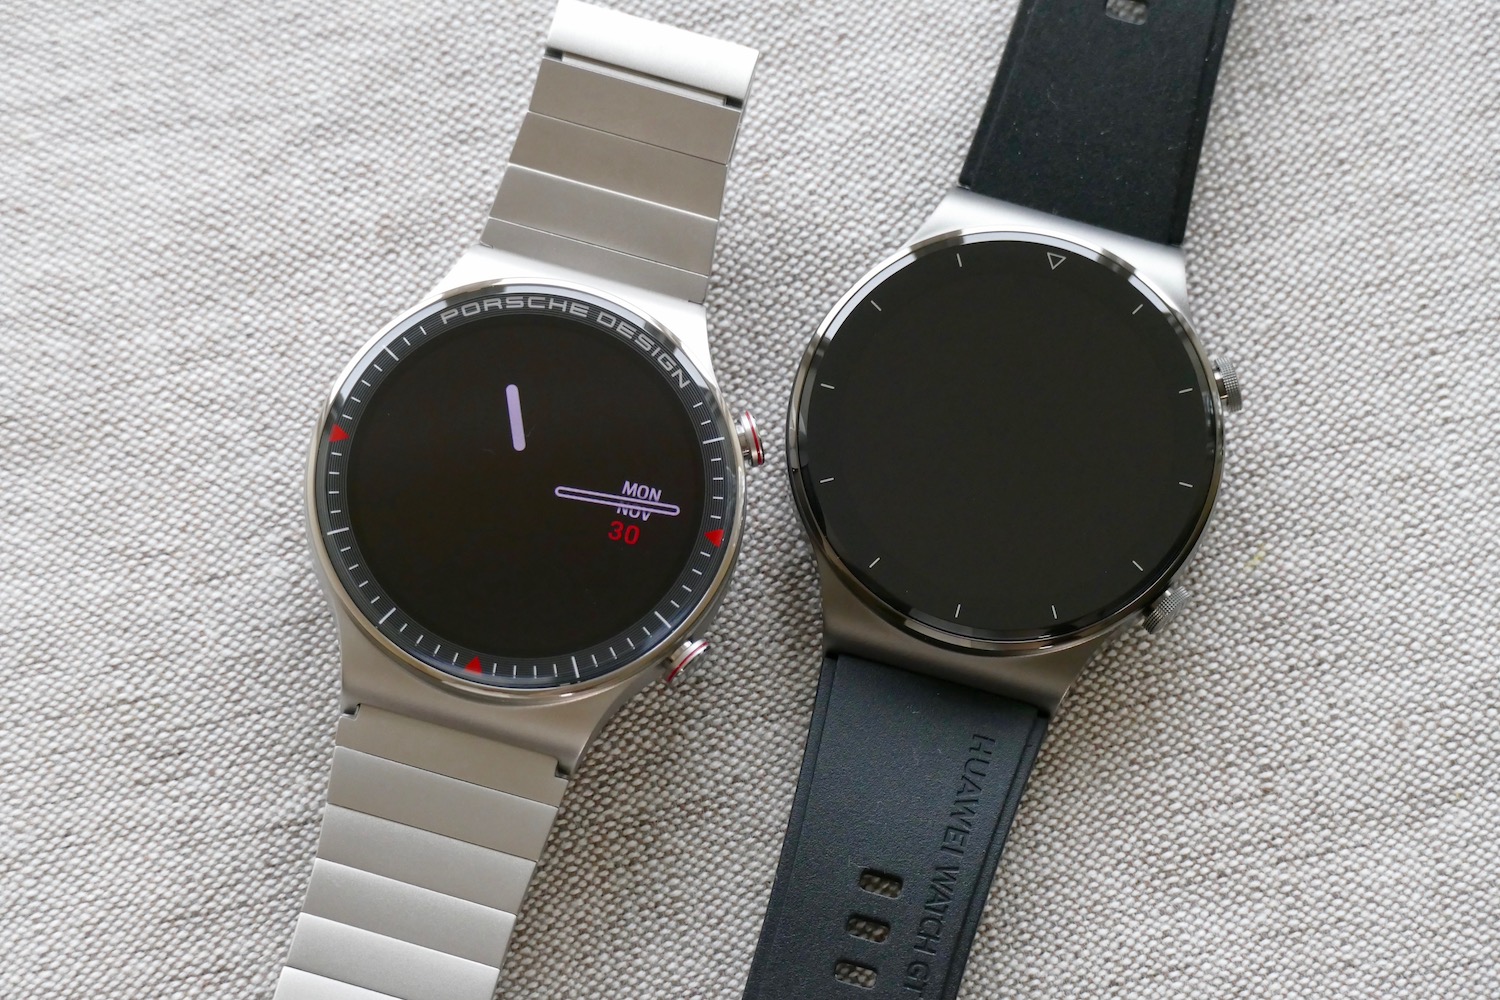 HUAWEI Watch GT2 gets Sp02 feature to monitor blood Oxygen levels